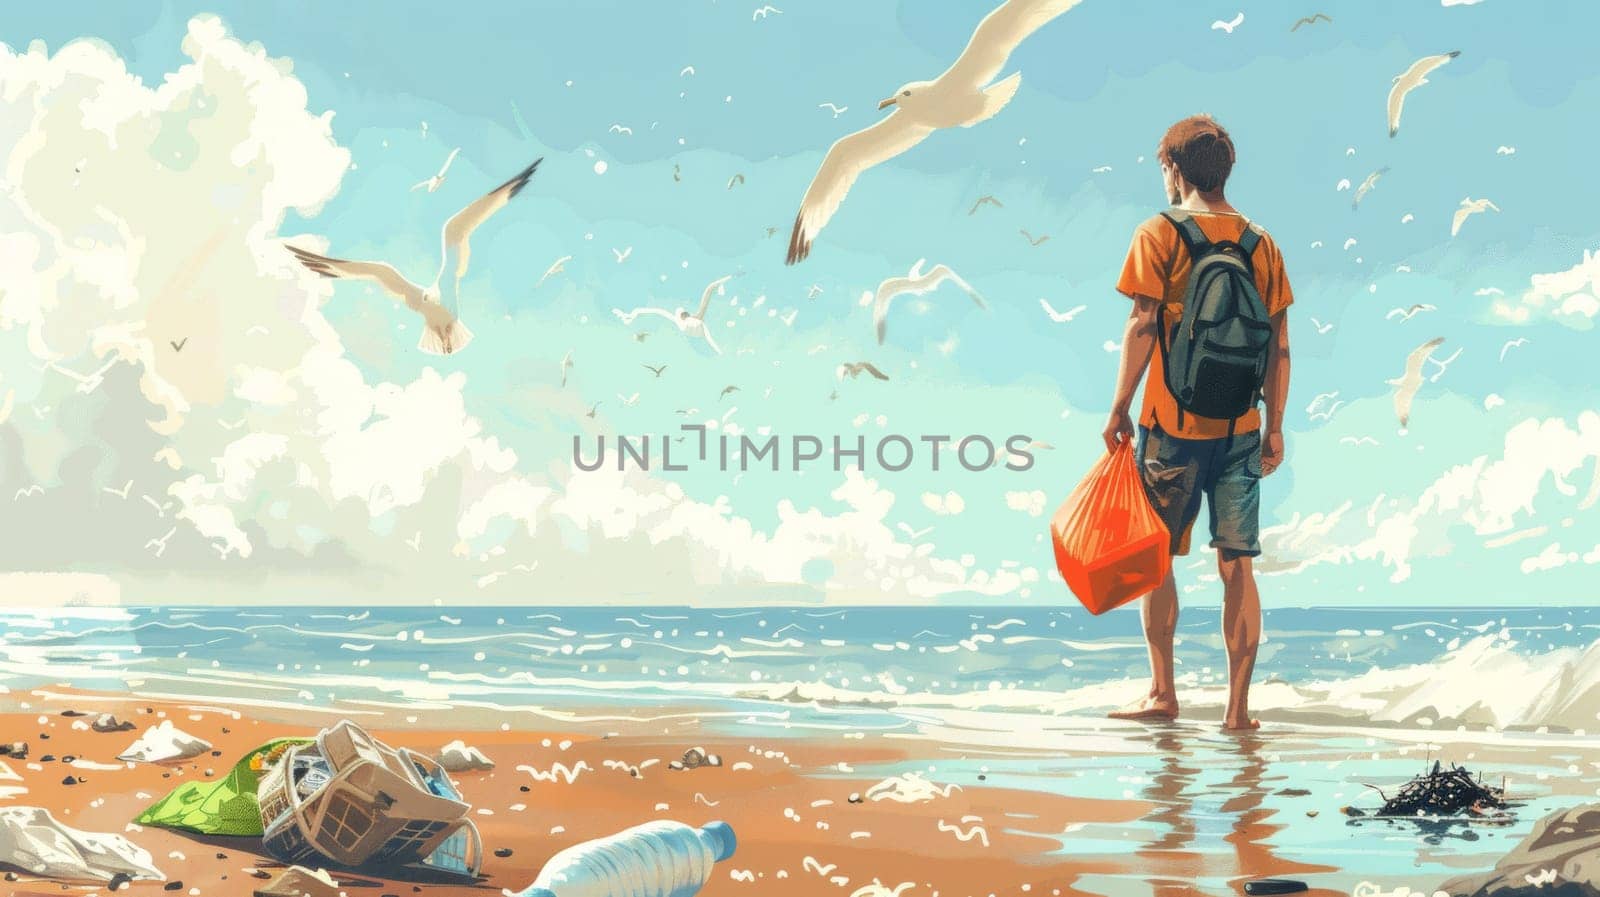 A man with backpack standing on beach looking at birds flying overhead